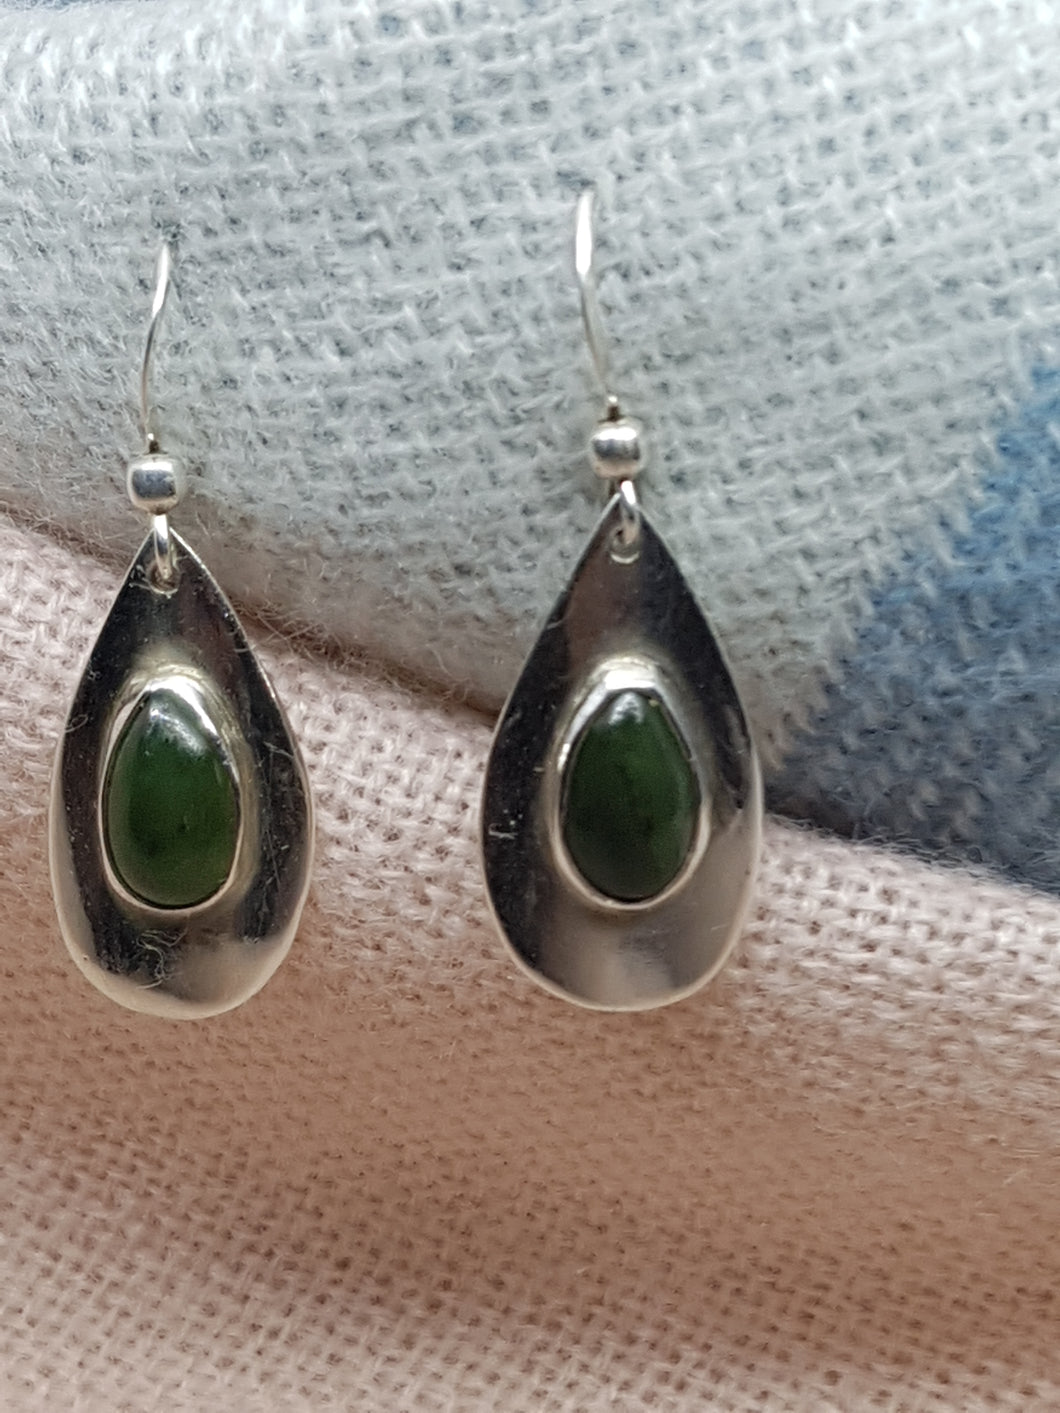 SOLD Sterling silver drop earrings set with Jade cabochon stones